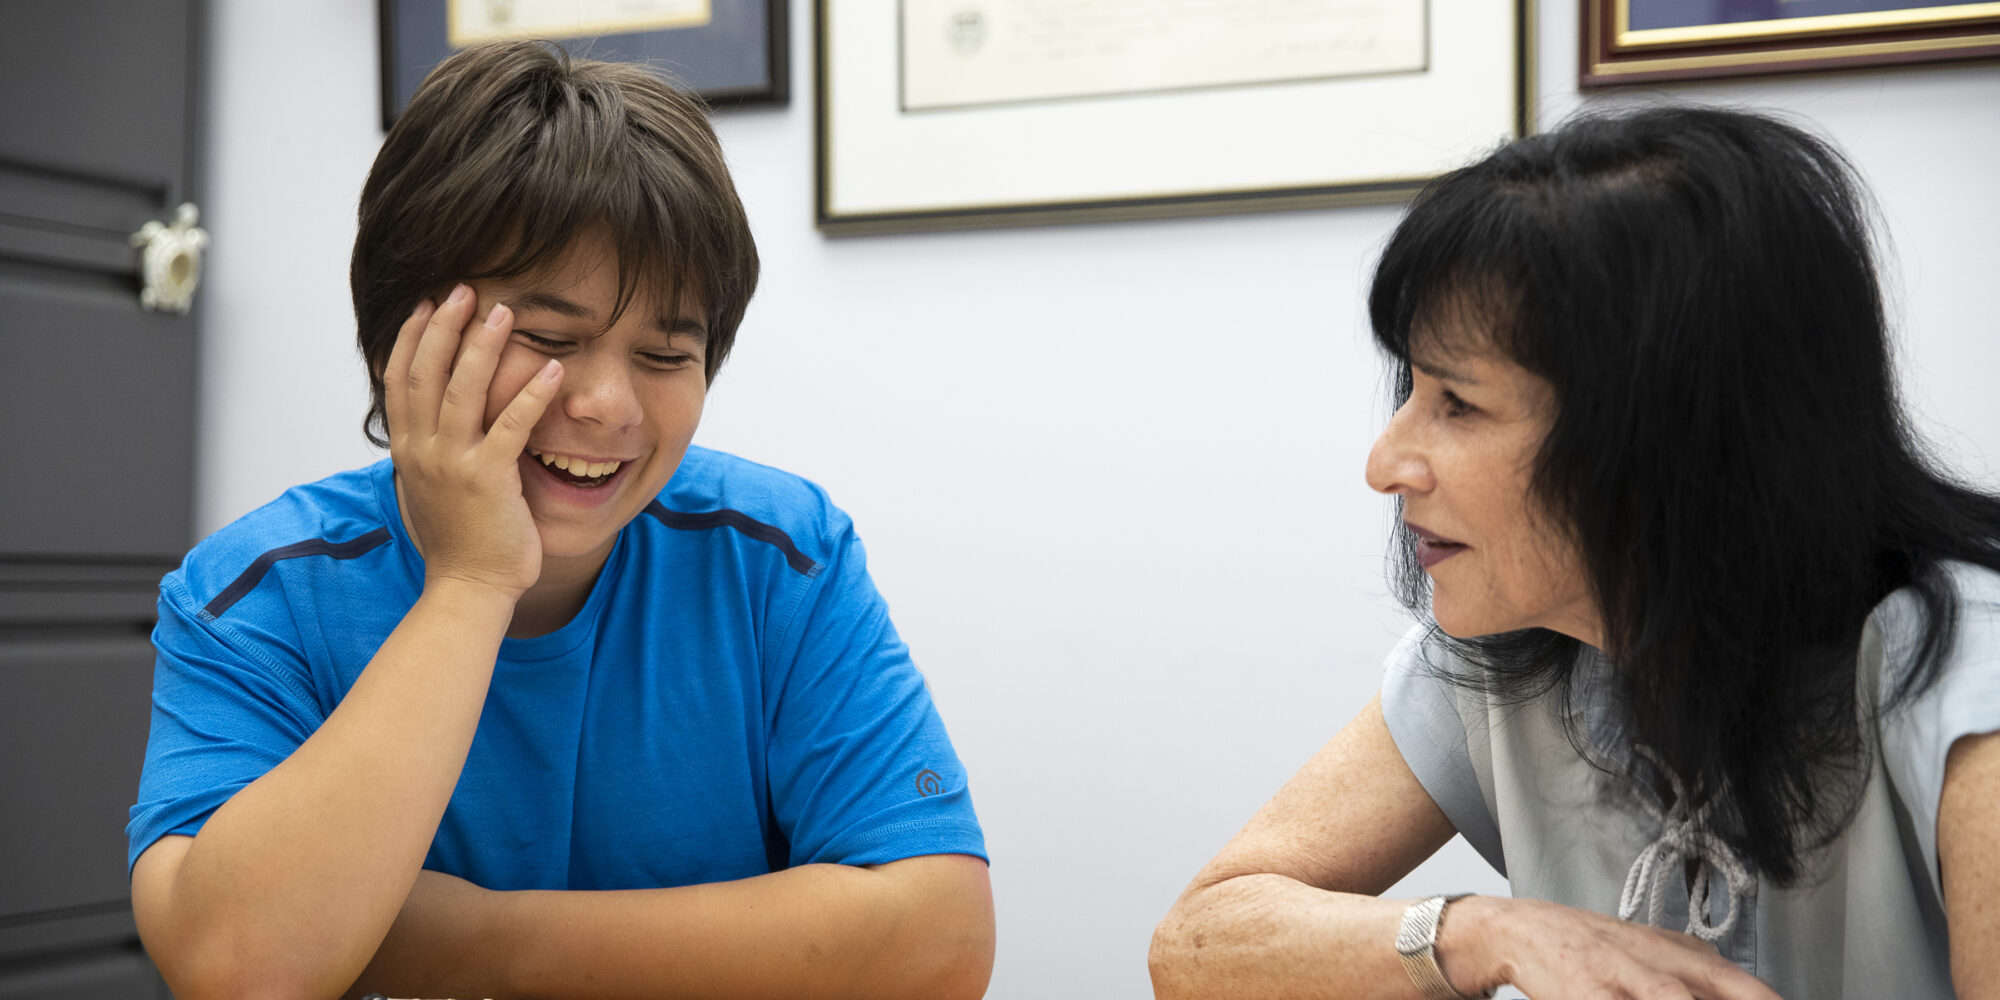 Linda Leibowitz in a counseling session with a middle grades boy who is laughing